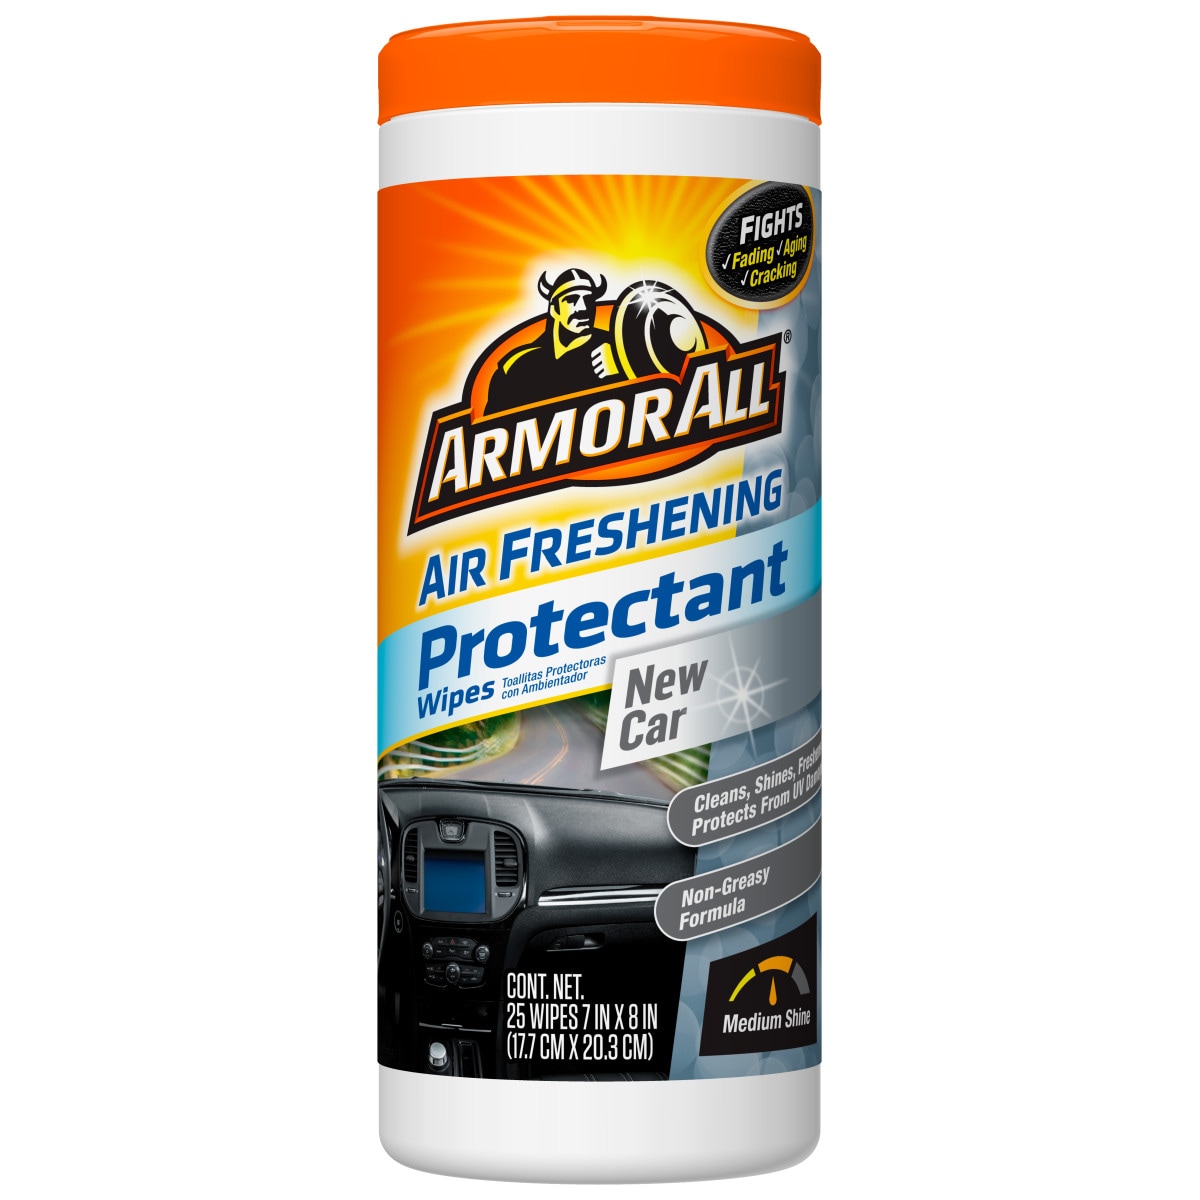 Armor All 75-Count Pads Car Interior Cleaner at